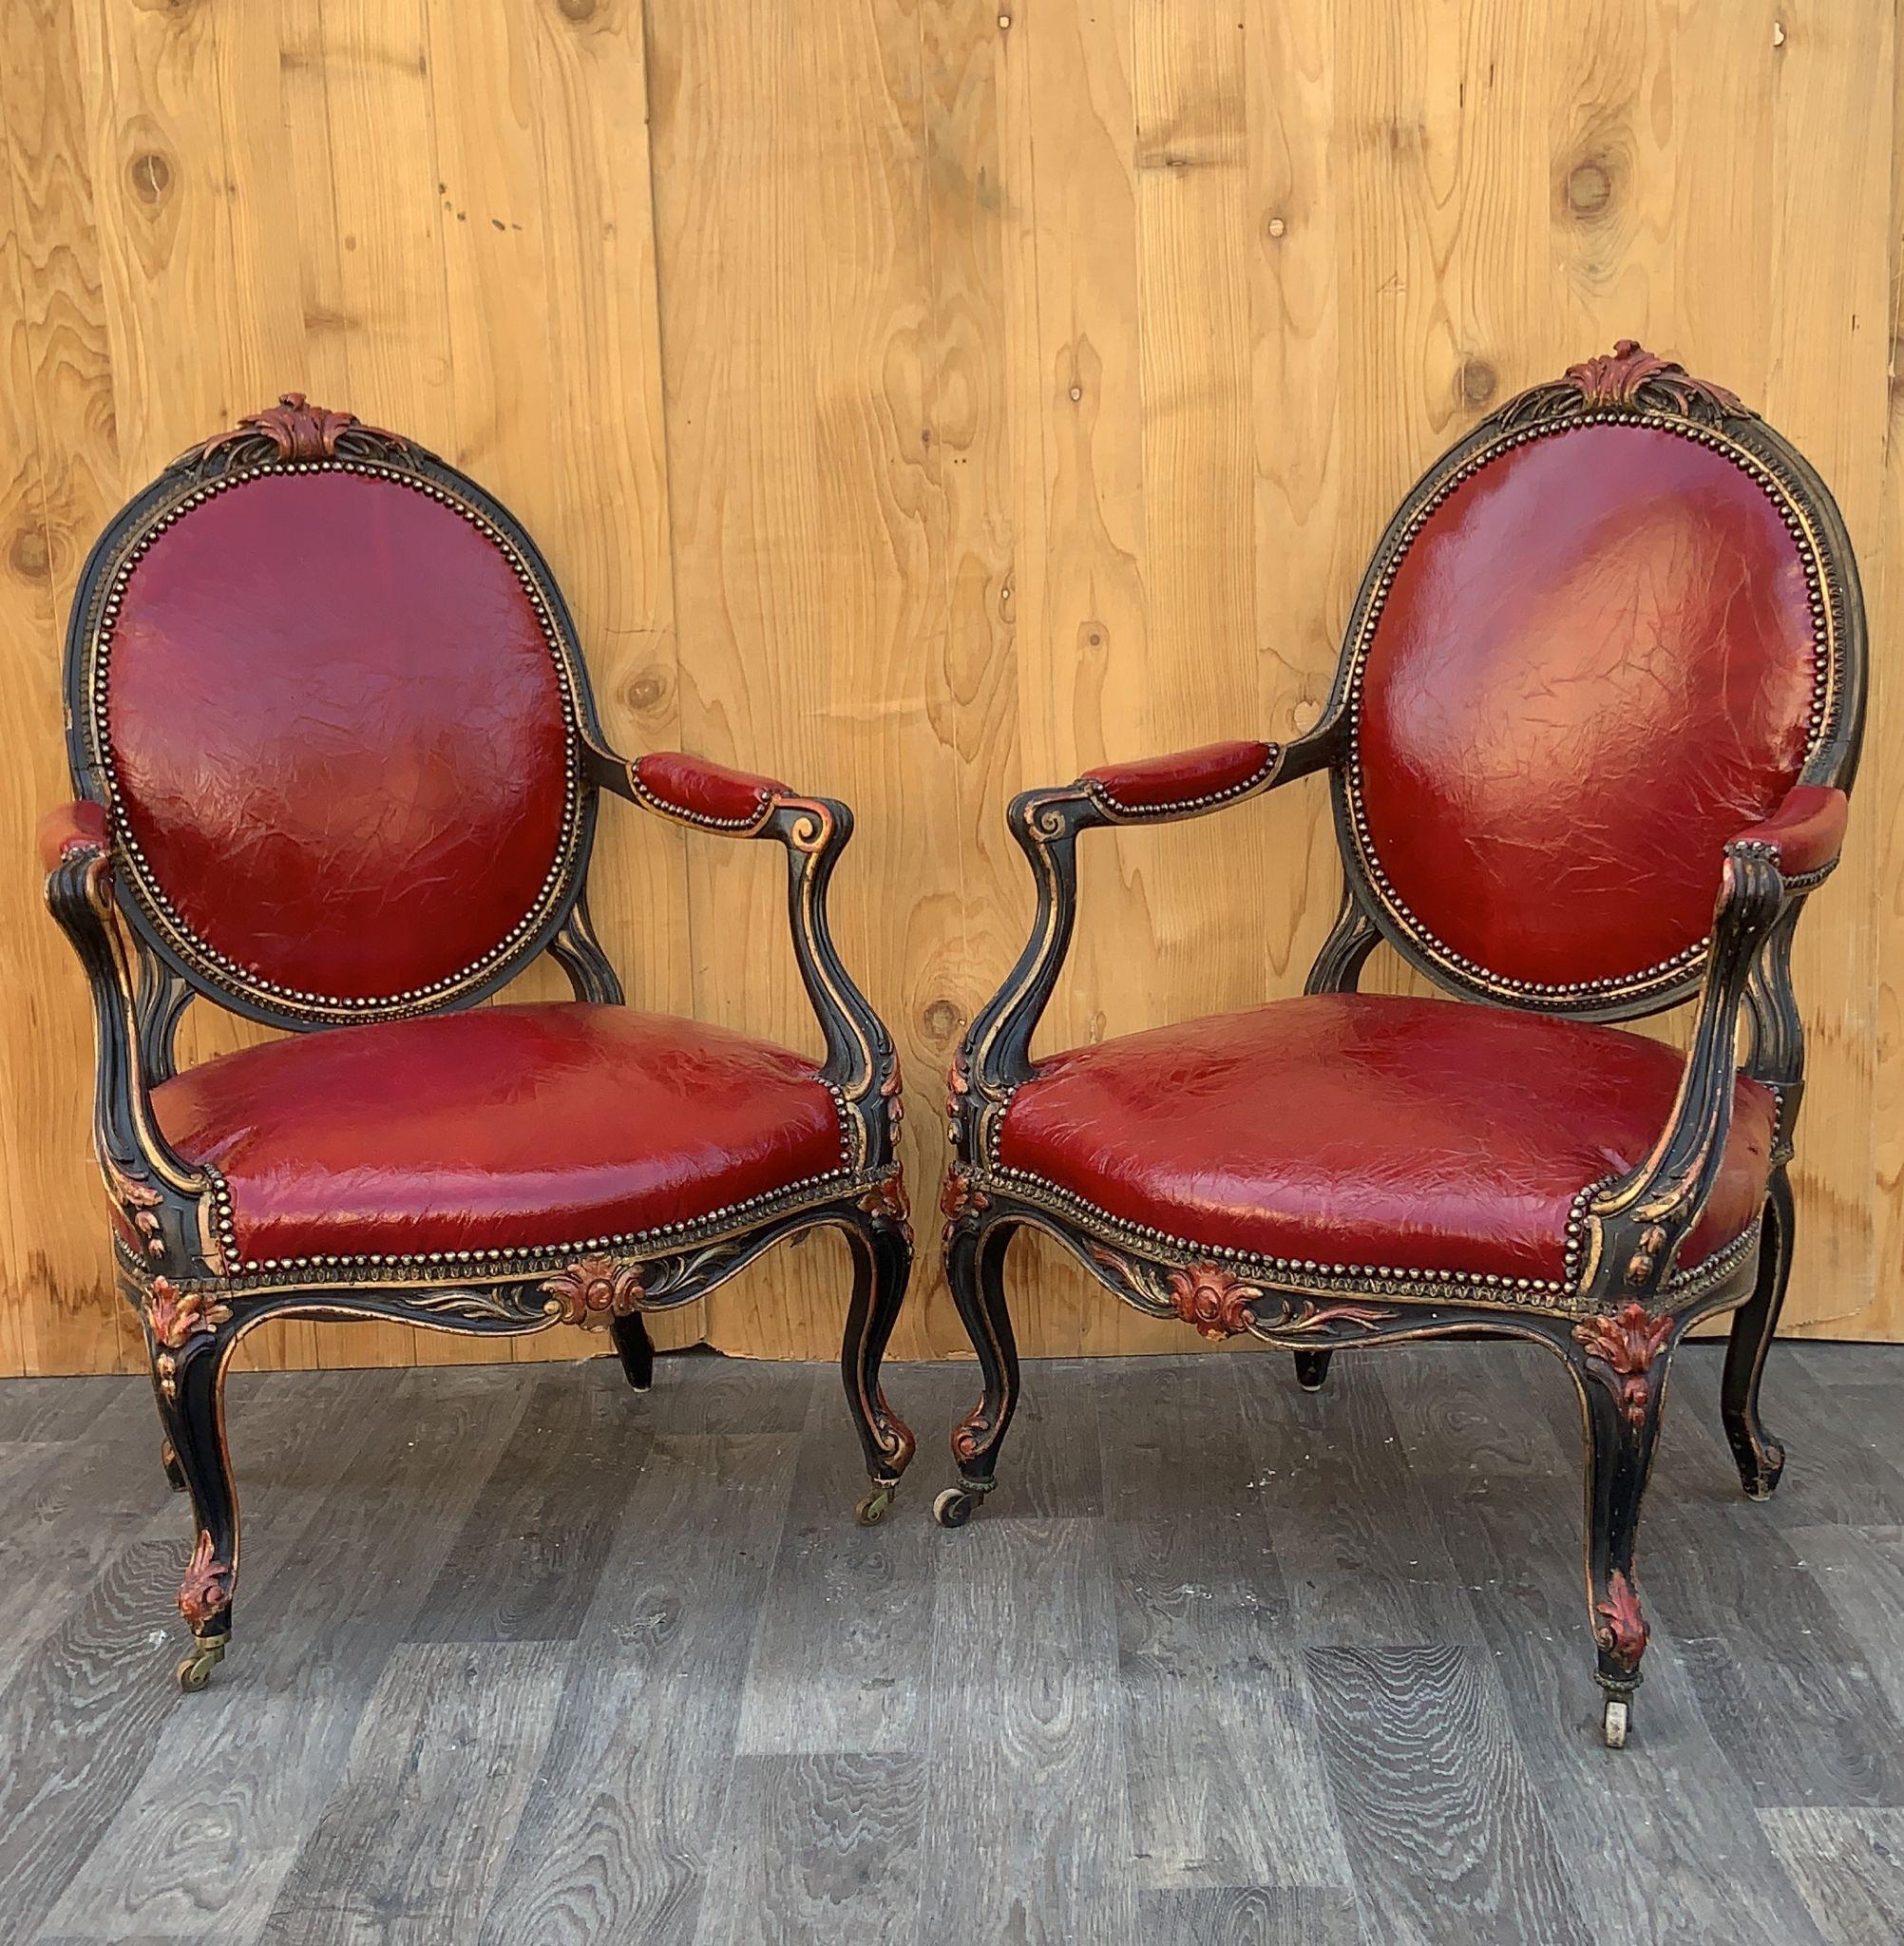 Antique French Napoleon III Carved Armchairs Newly Upholstered in Deep-Red Distressed Italian Leather - Pair 

Unique antique pair of Napoleon III period armchairs with curly frame and armrests on s-legs. The high, rounded backrest, seat and